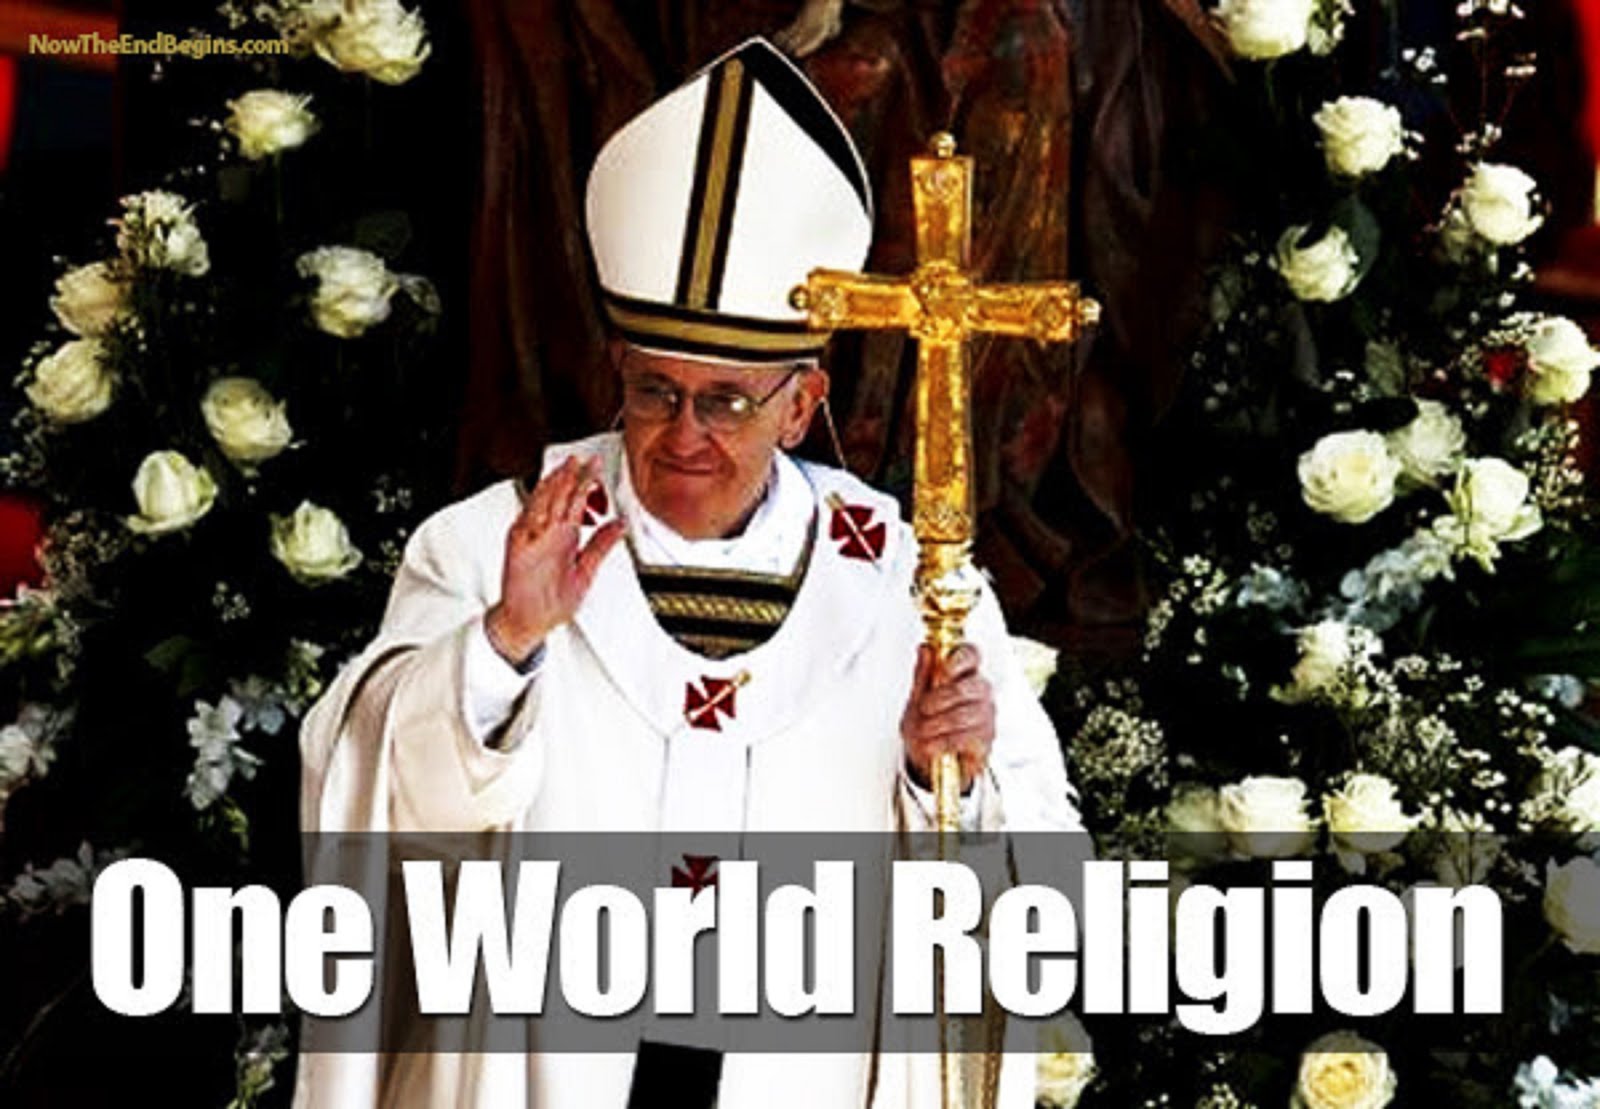 POPE FRANCIS' NEW "ONE WORLD CHURCH" MARKED 666 WITH THE "NEW WORLD ORDER"